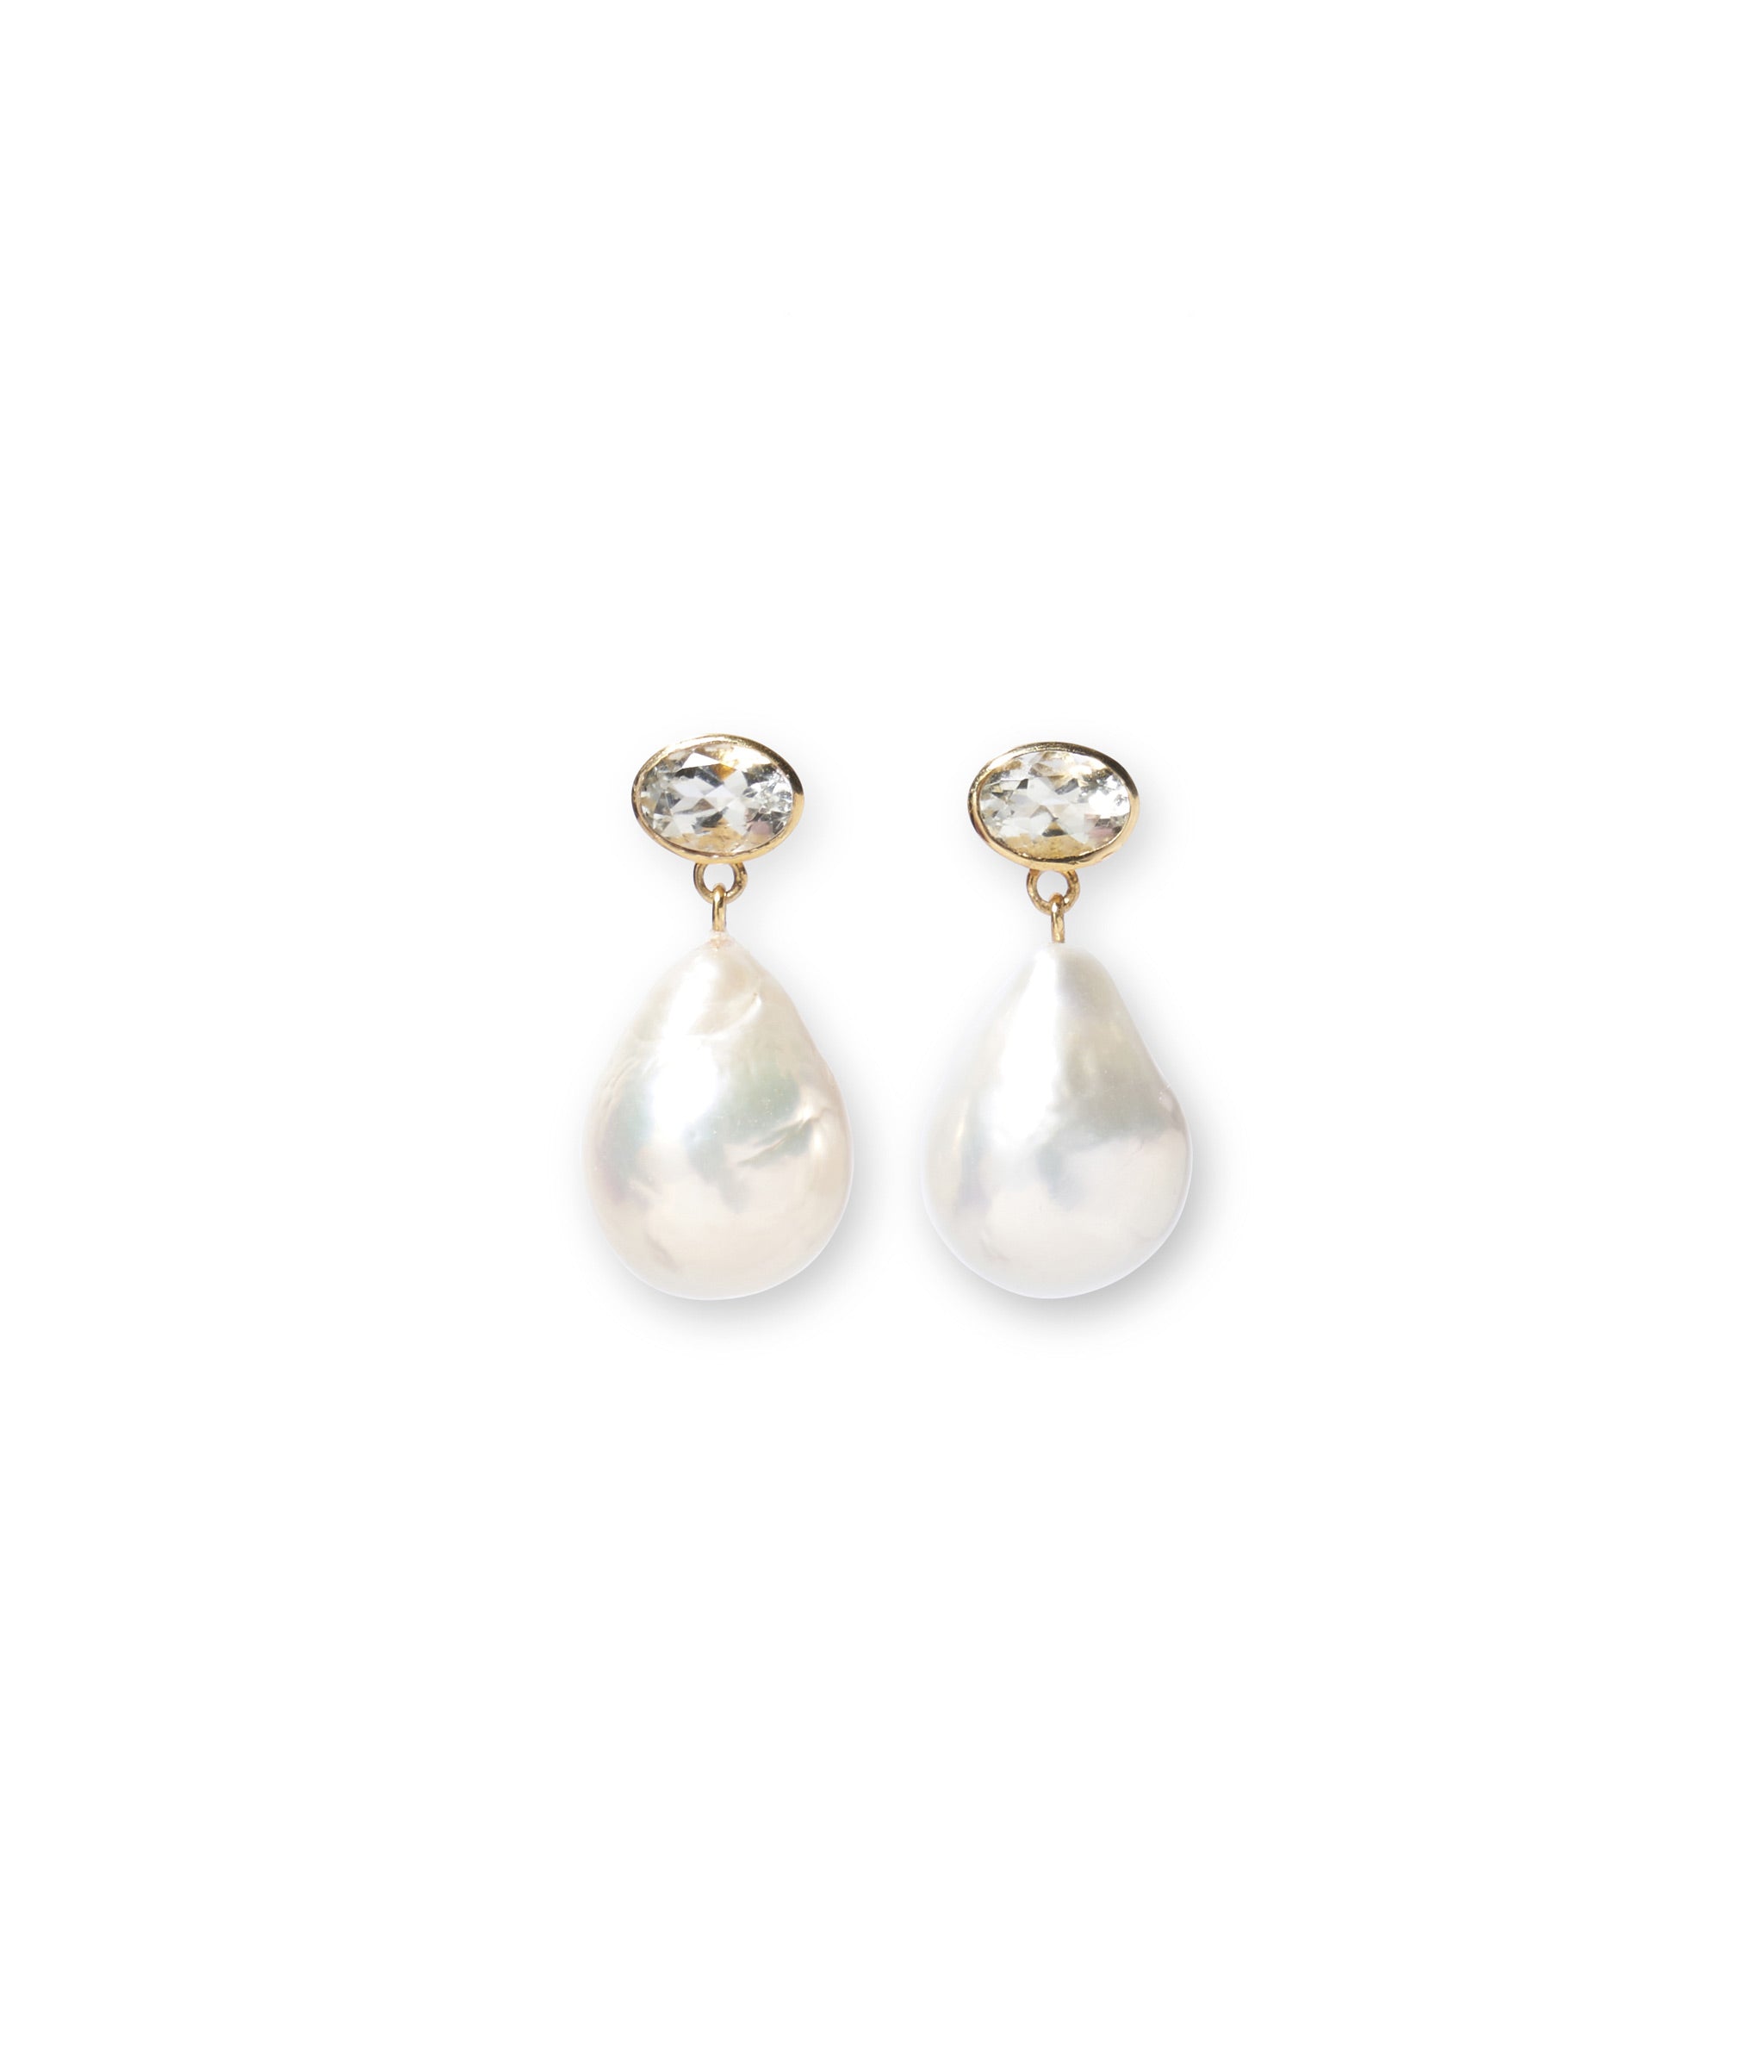 14k gold earrings with faceted semiprecious green amethyst tops and hanging baroque pearl drops.